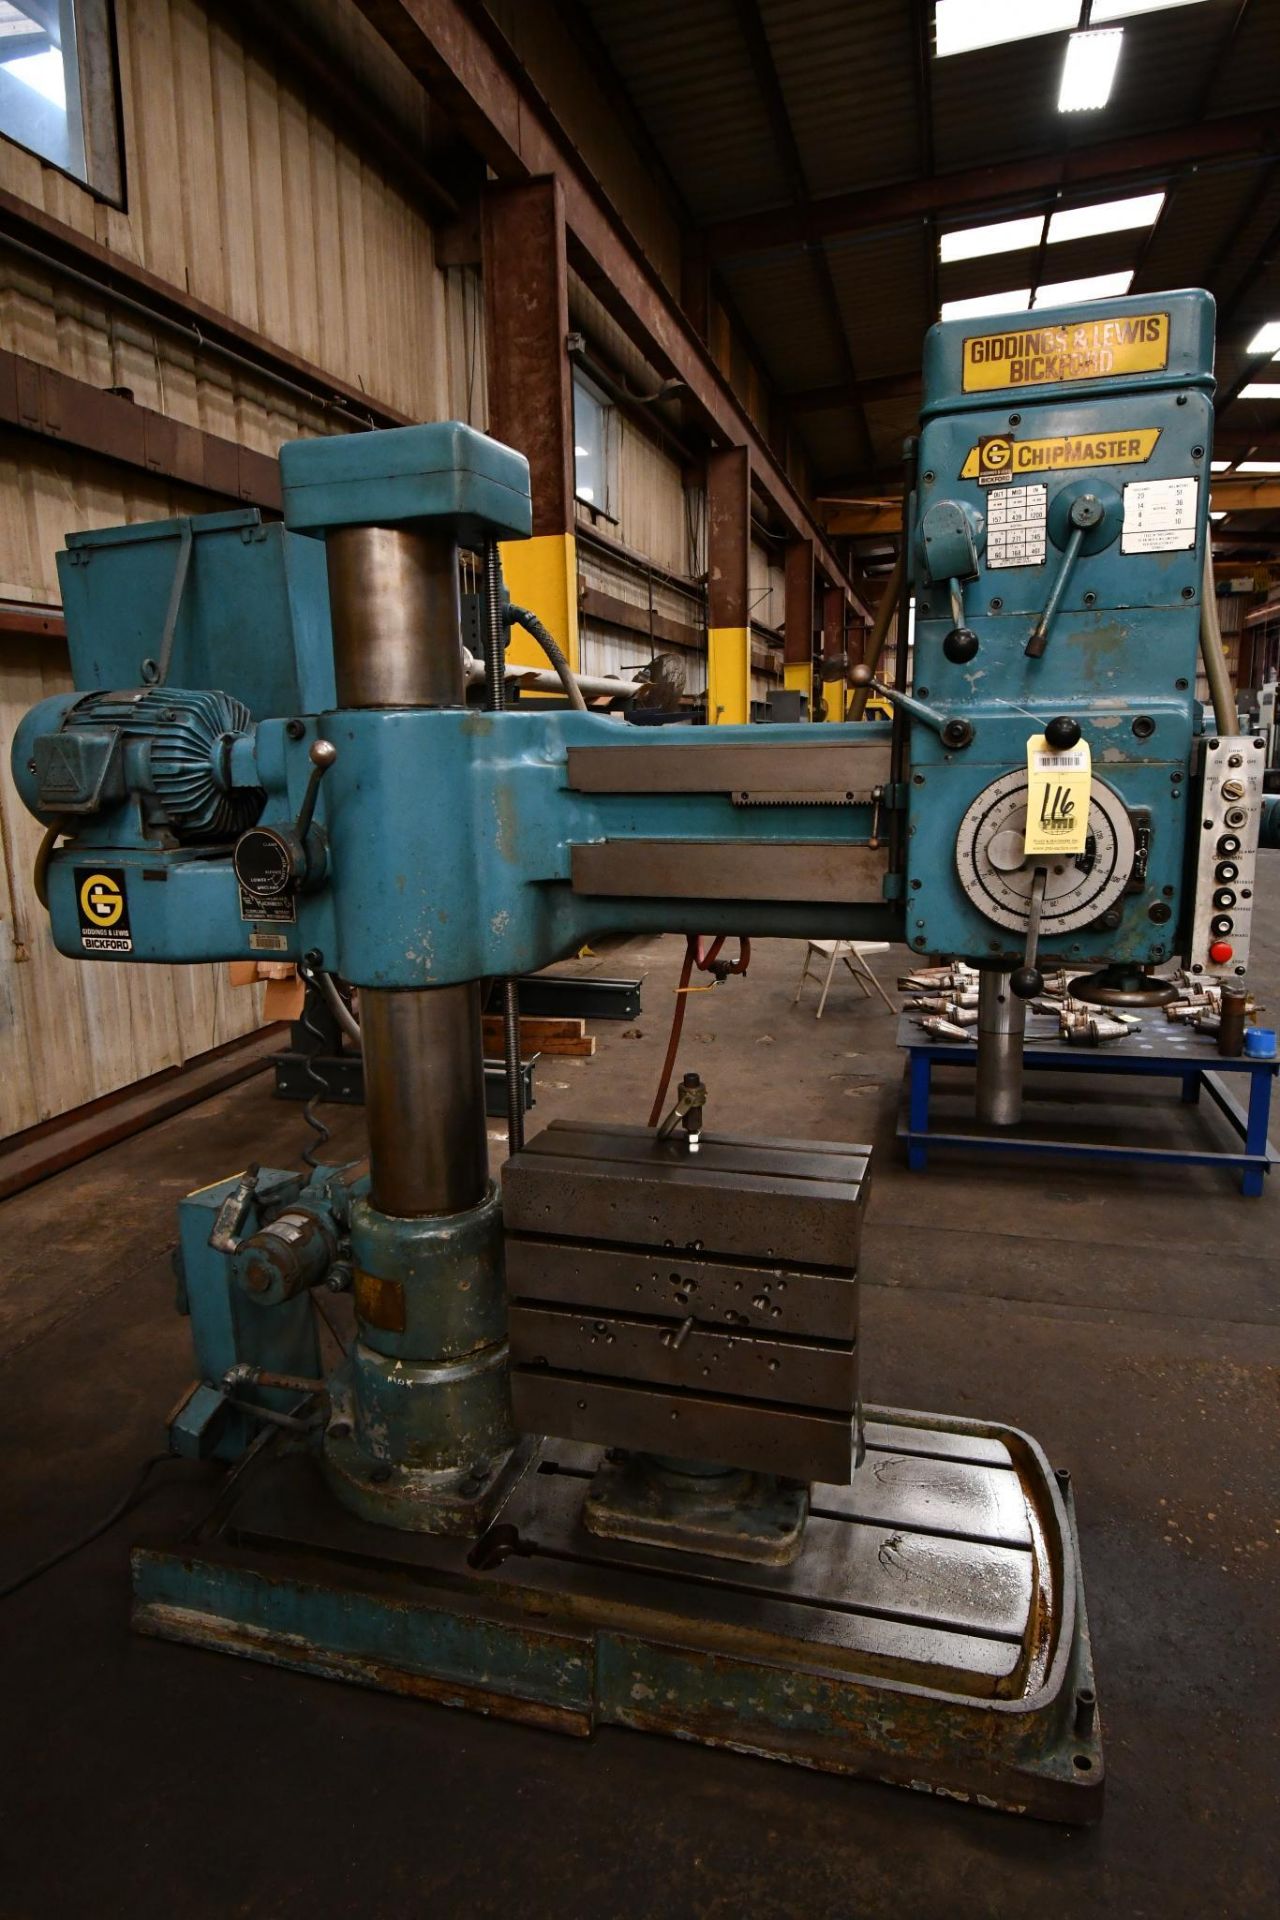 RADIAL ARM DRILL, GIDDINGS & LEWIS BICKFORD CHIPMASTER, 6' X 15", pwr. Clamp, feed & elevation box t